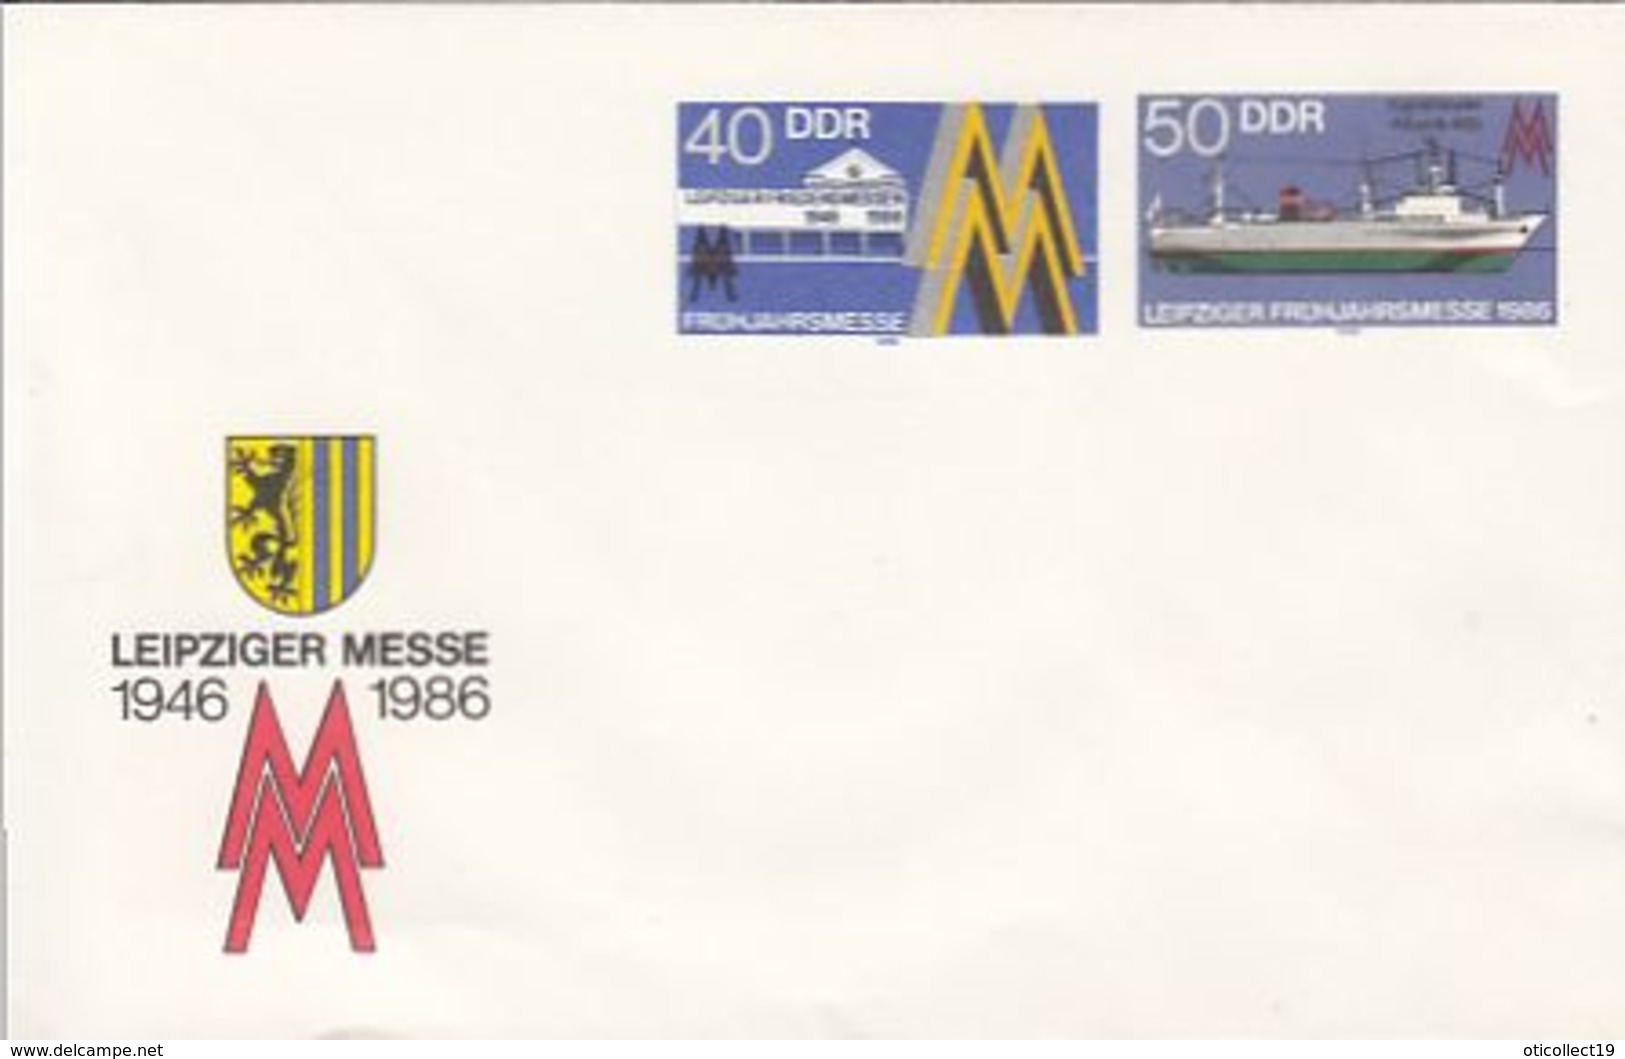 LEIPZIG FAIR, COAT OF ARMS, SHIPP, COVER STATIONERY, 1986, GERMANY-DDR - Buste - Nuovi